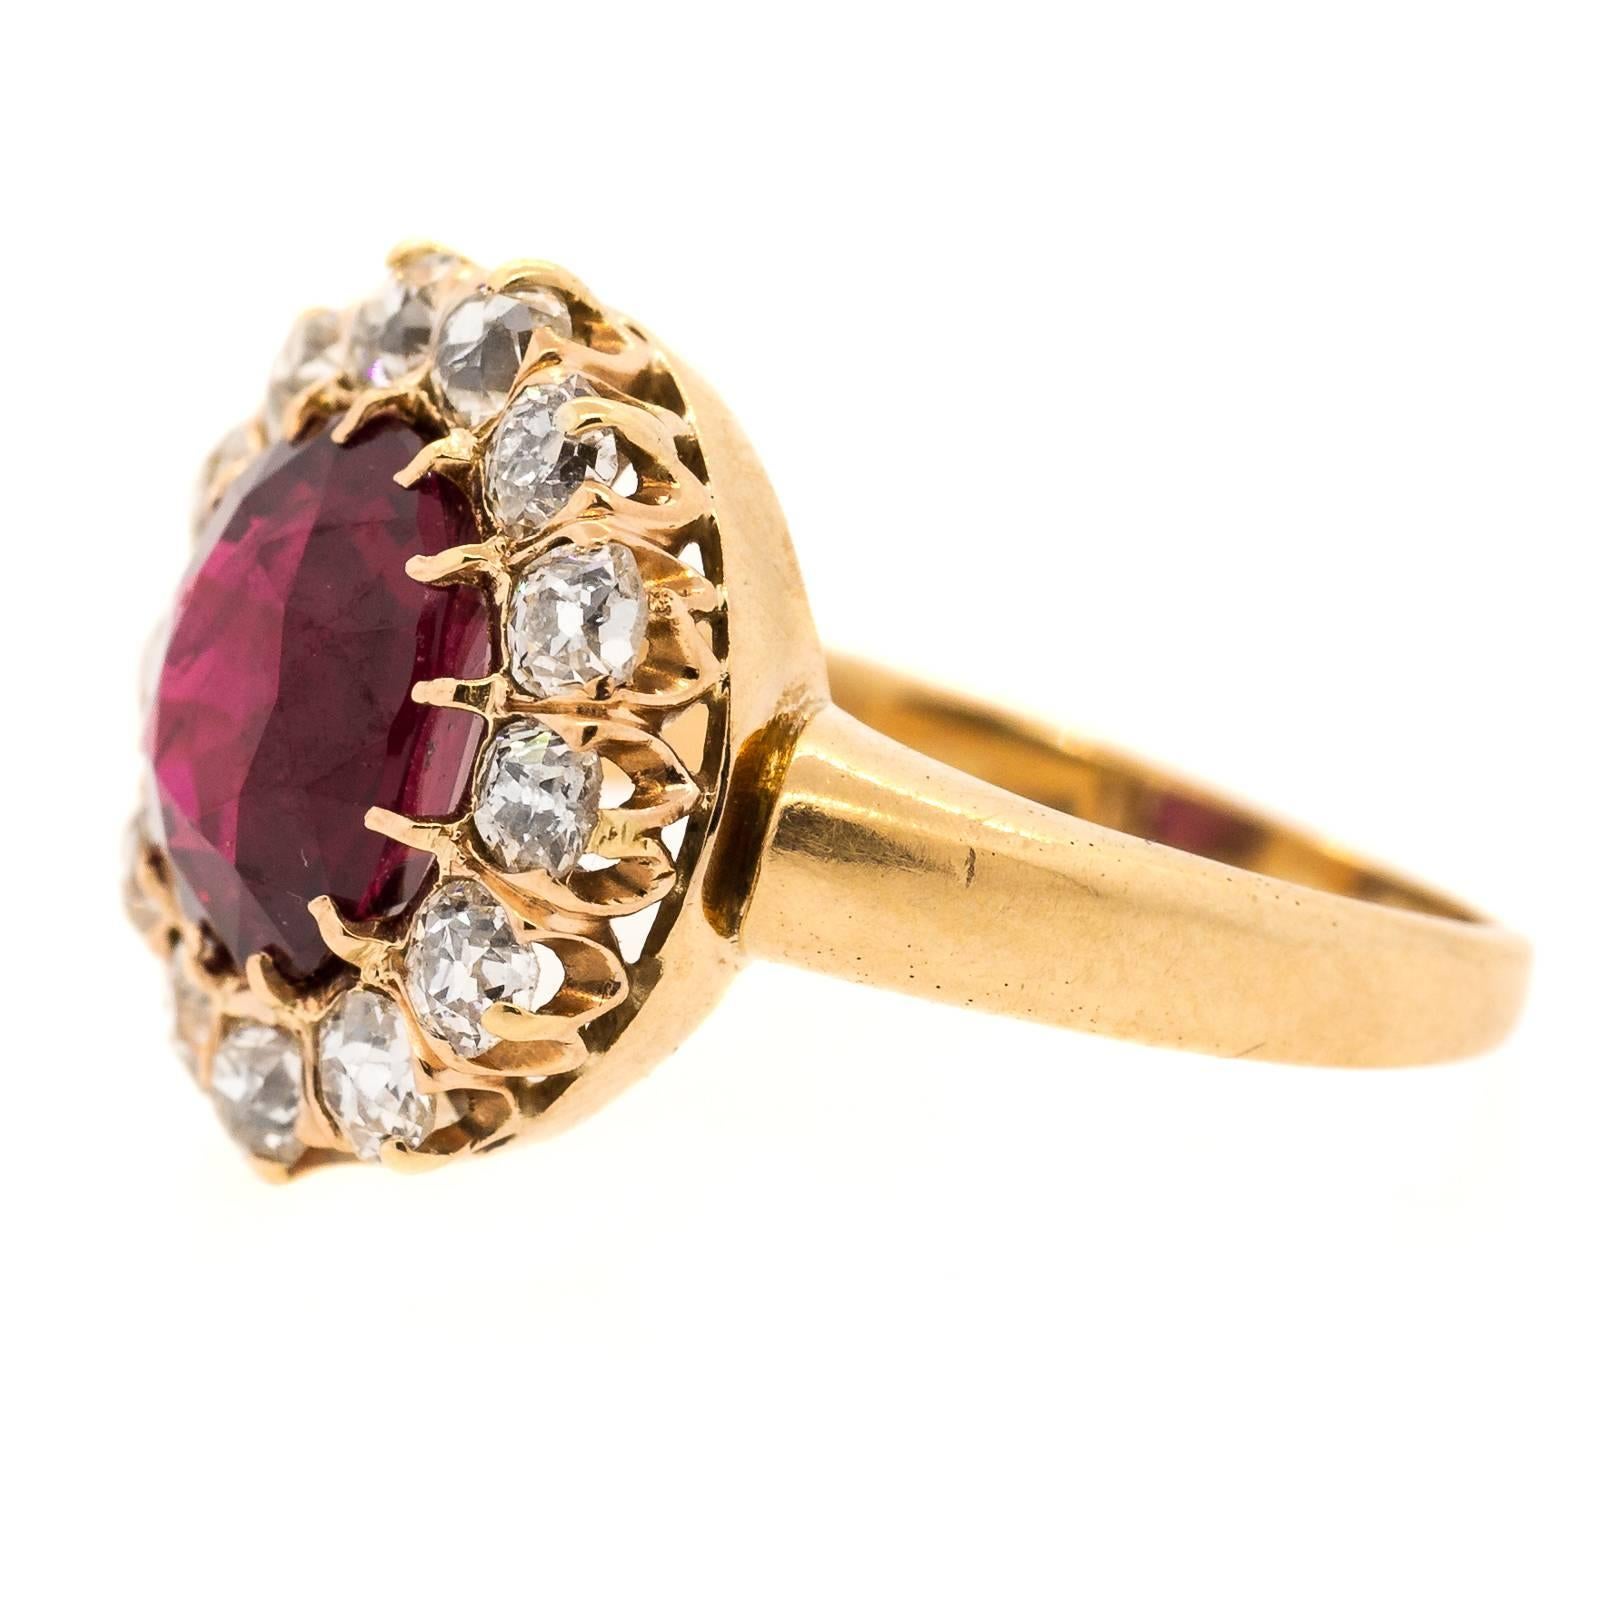 Splendorous circa 1910 three twenty-five carats G.I.A. Thai Ruby set in a fabulous 14KT yellow gold cluster setting and surrounded by thirteen Old European Cut Diamonds of H/I color.  A brilliant piece from the past!